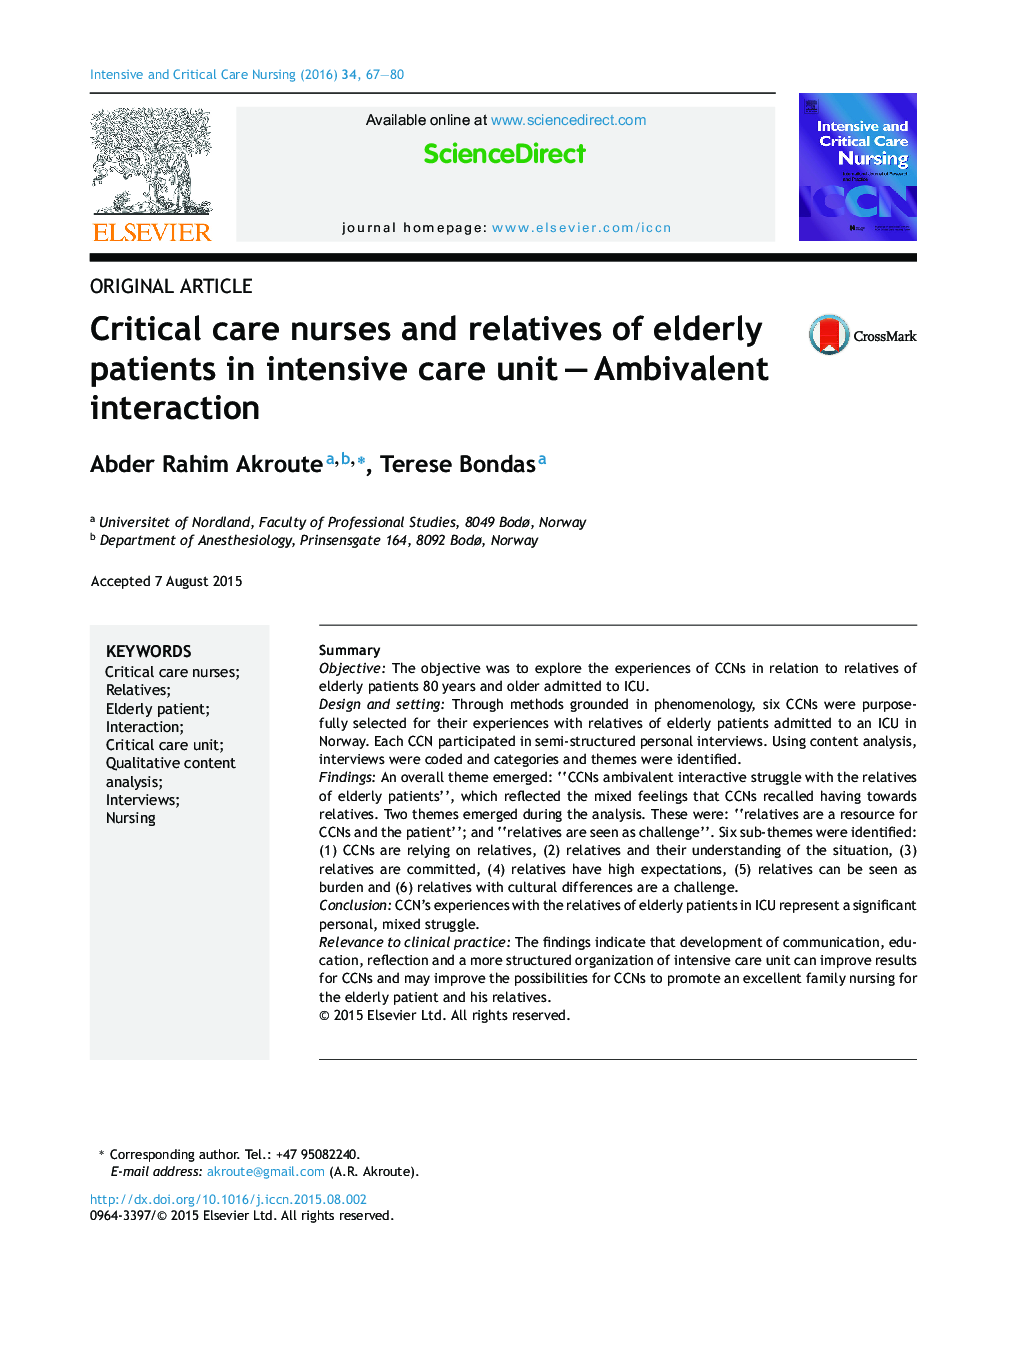 Critical care nurses and relatives of elderly patients in intensive care unit – Ambivalent interaction